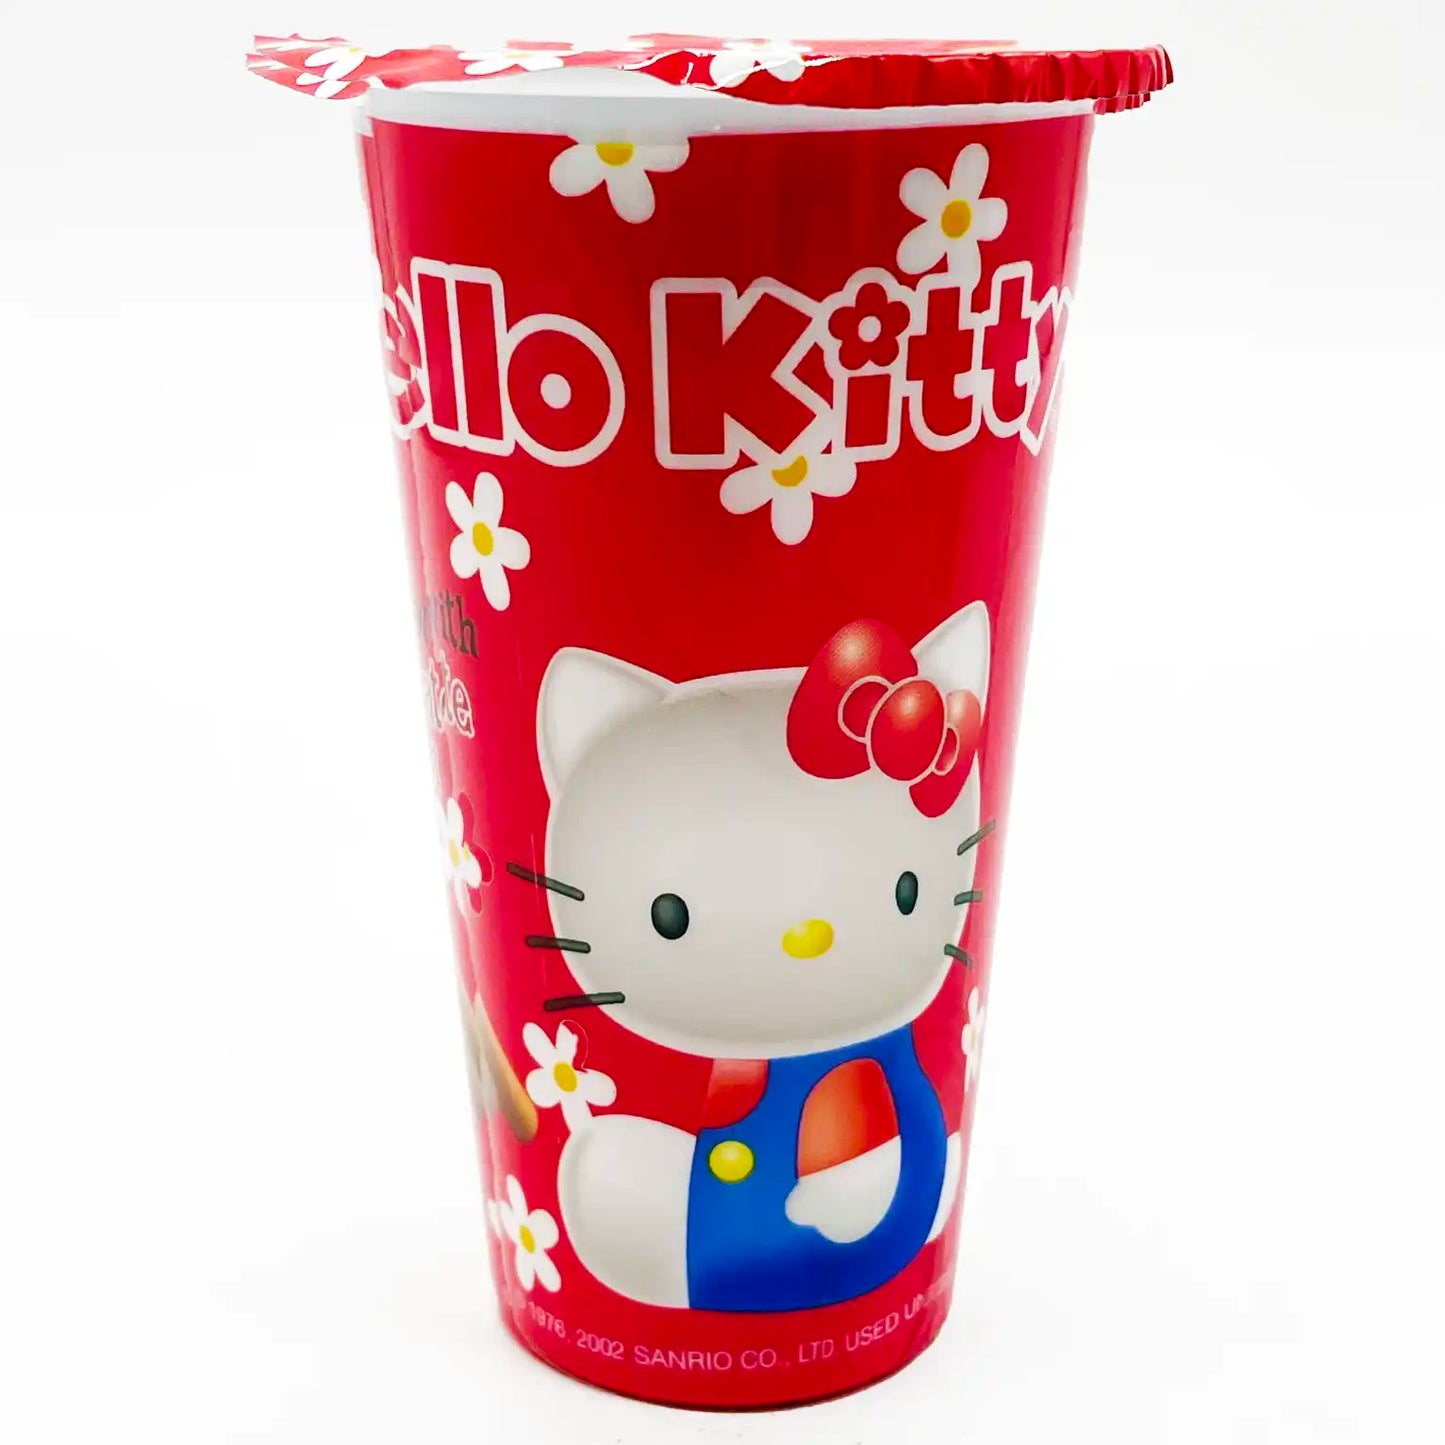 Hello Kitty Biscuits with Chocolate Cream 1.16 oz